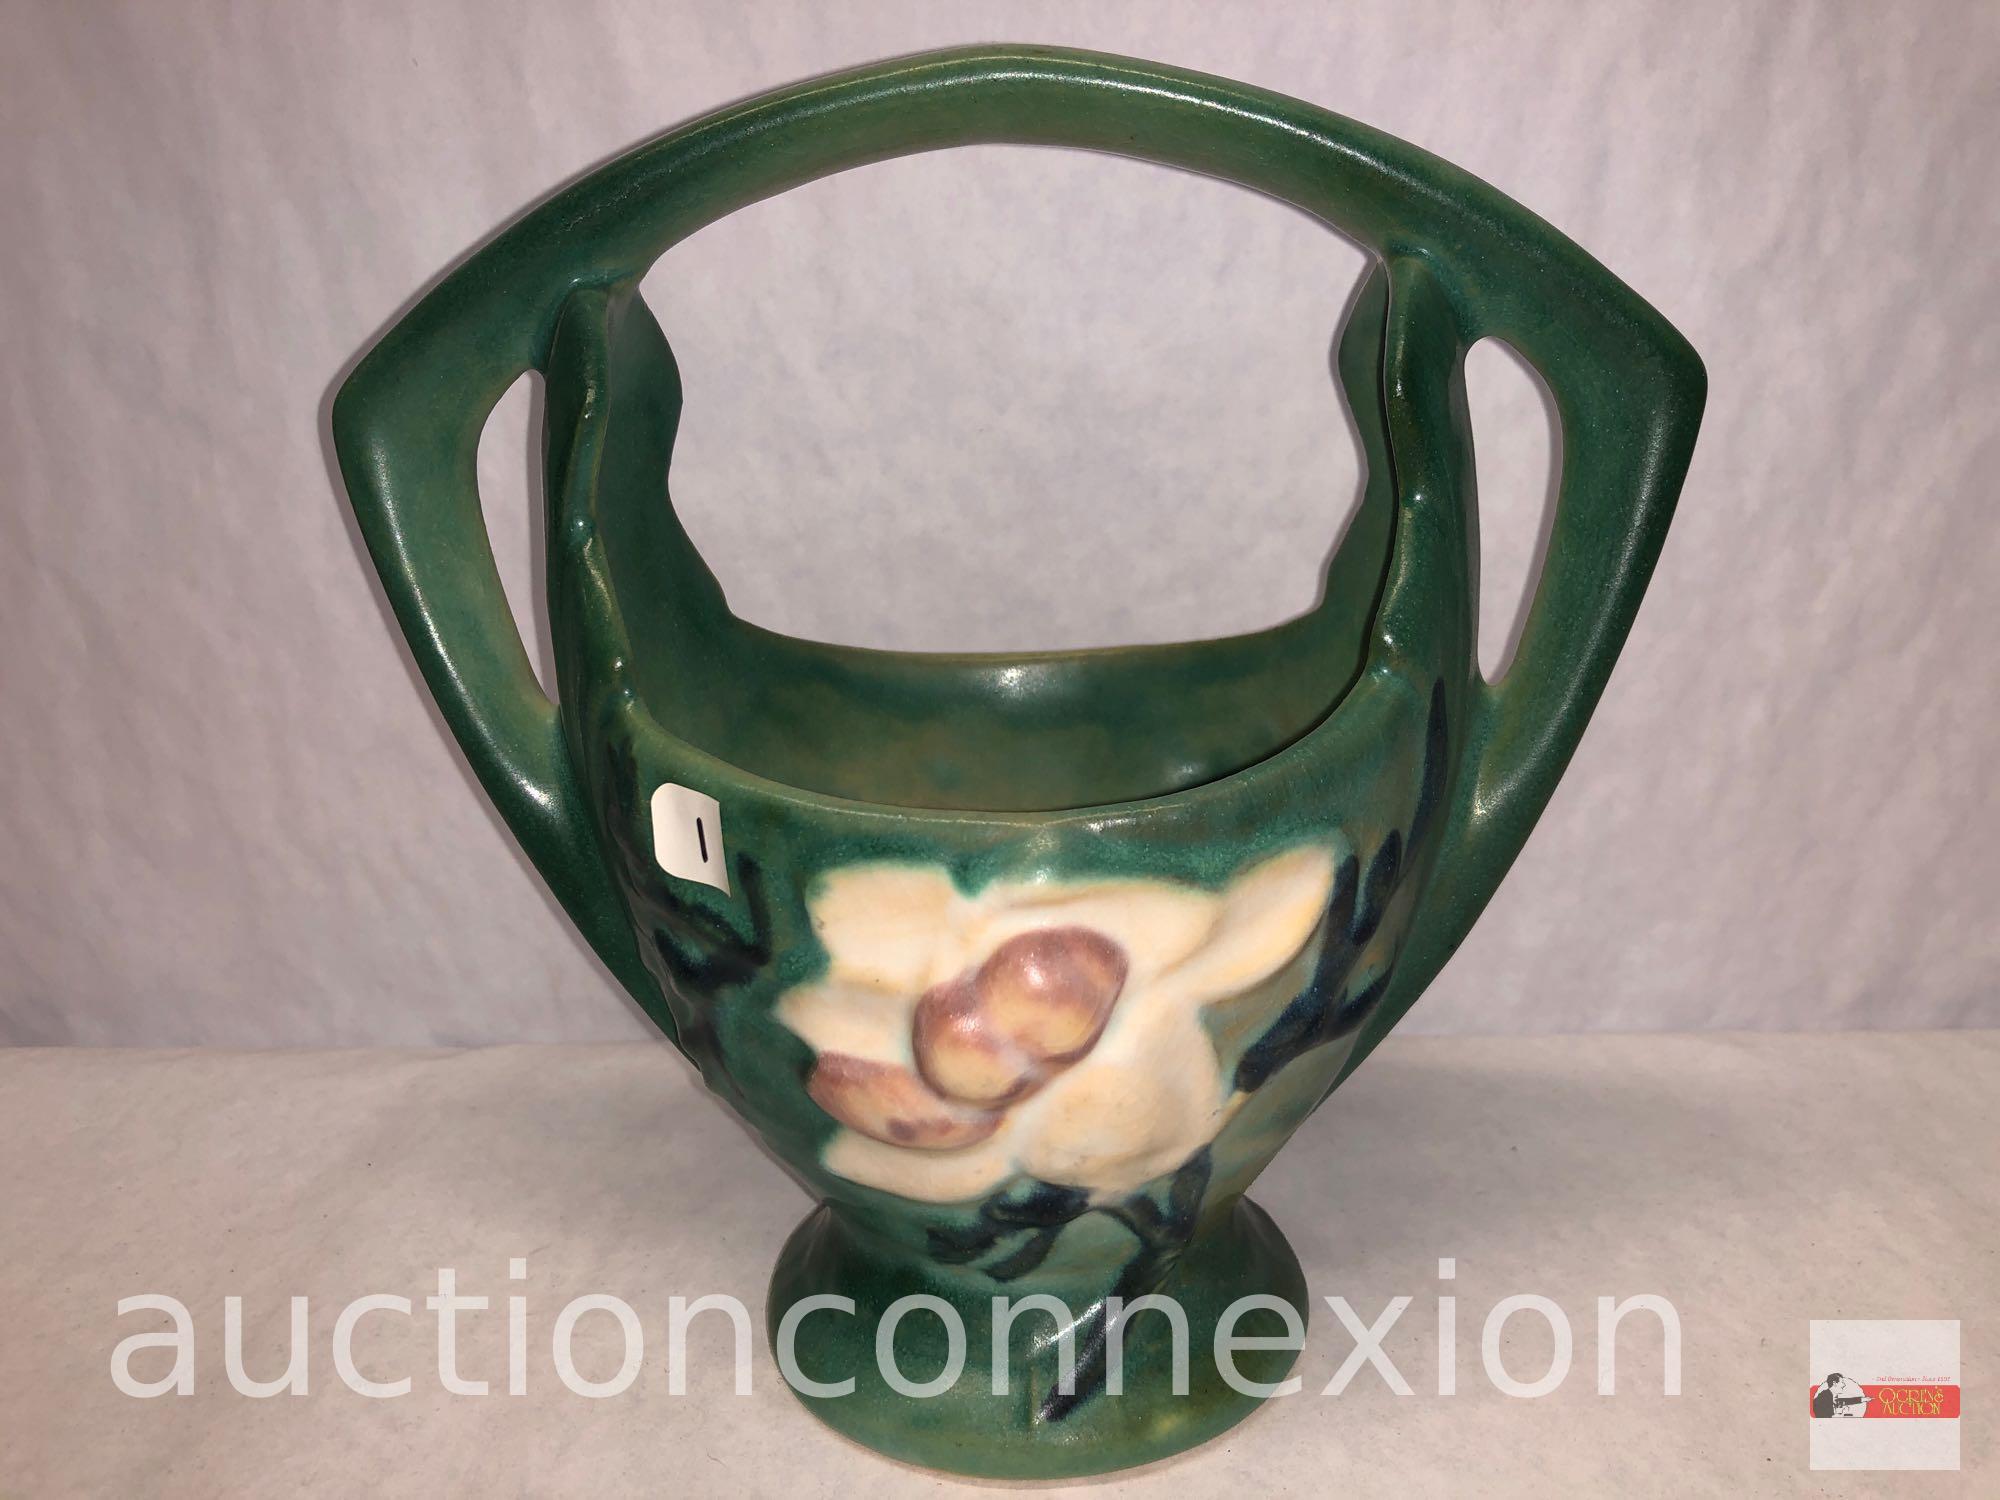 Pottery - Roseville - Magnolia #383-7, green, Magnolia is a late period line introduced by Roseville